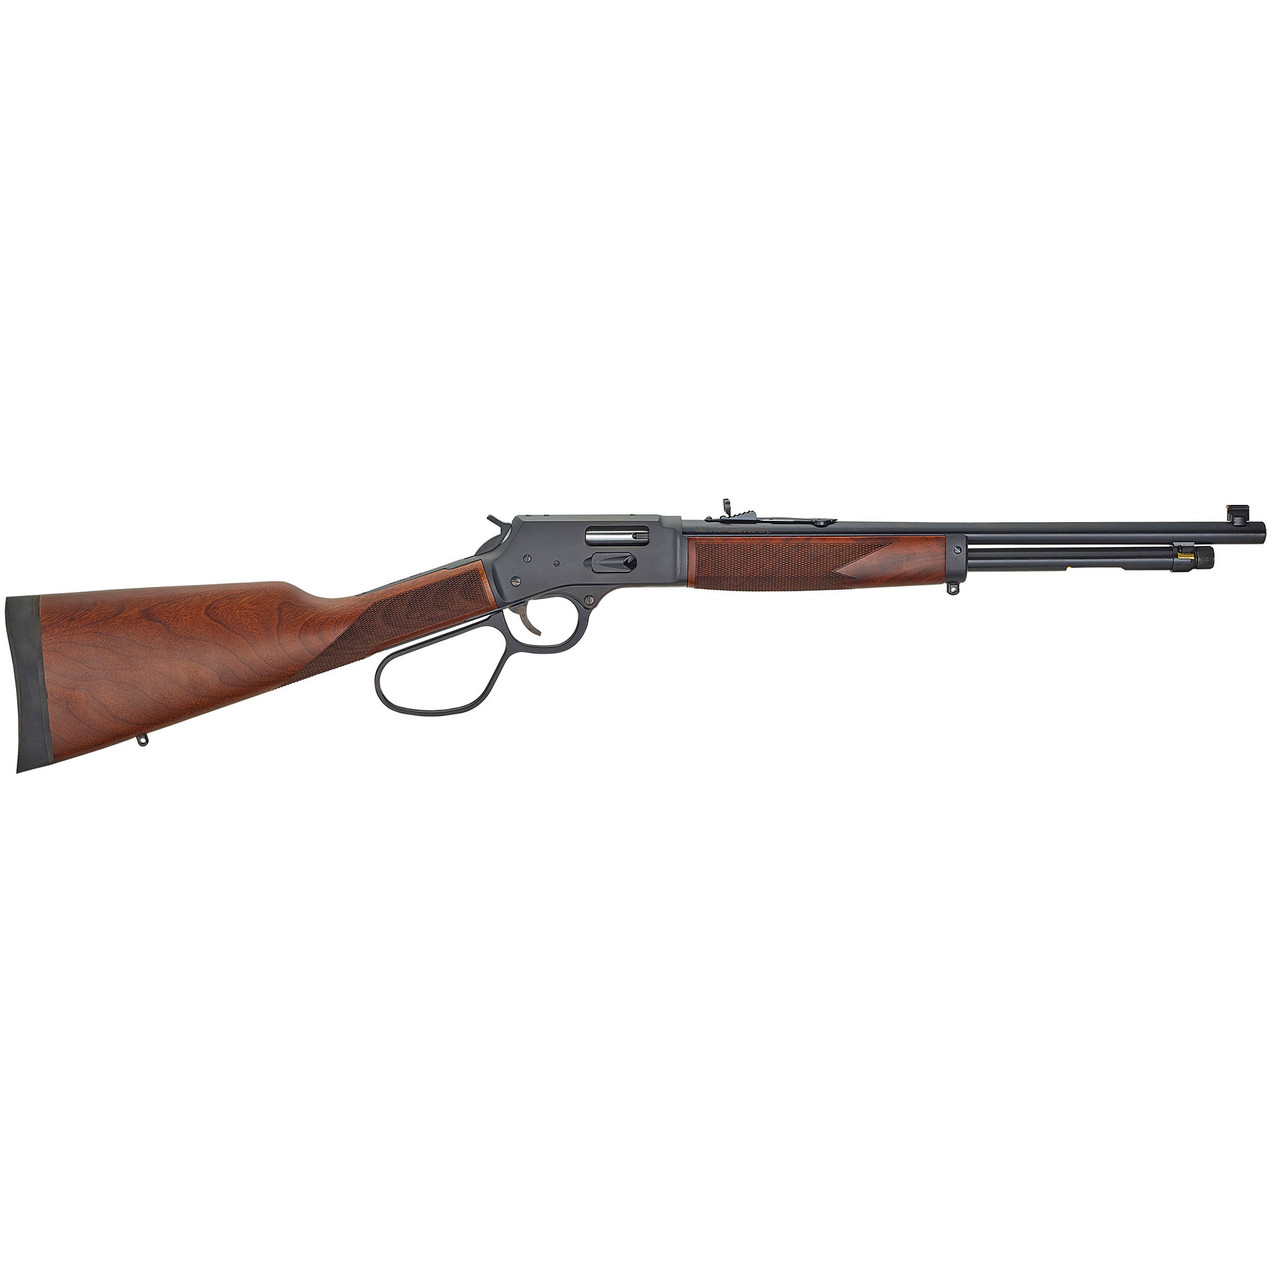 Image of HENRY REPEATING ARMS BIG BOY SIDE GATE .357 MAGNUM 16.5" BARREL 7-ROUNDS WALNUT